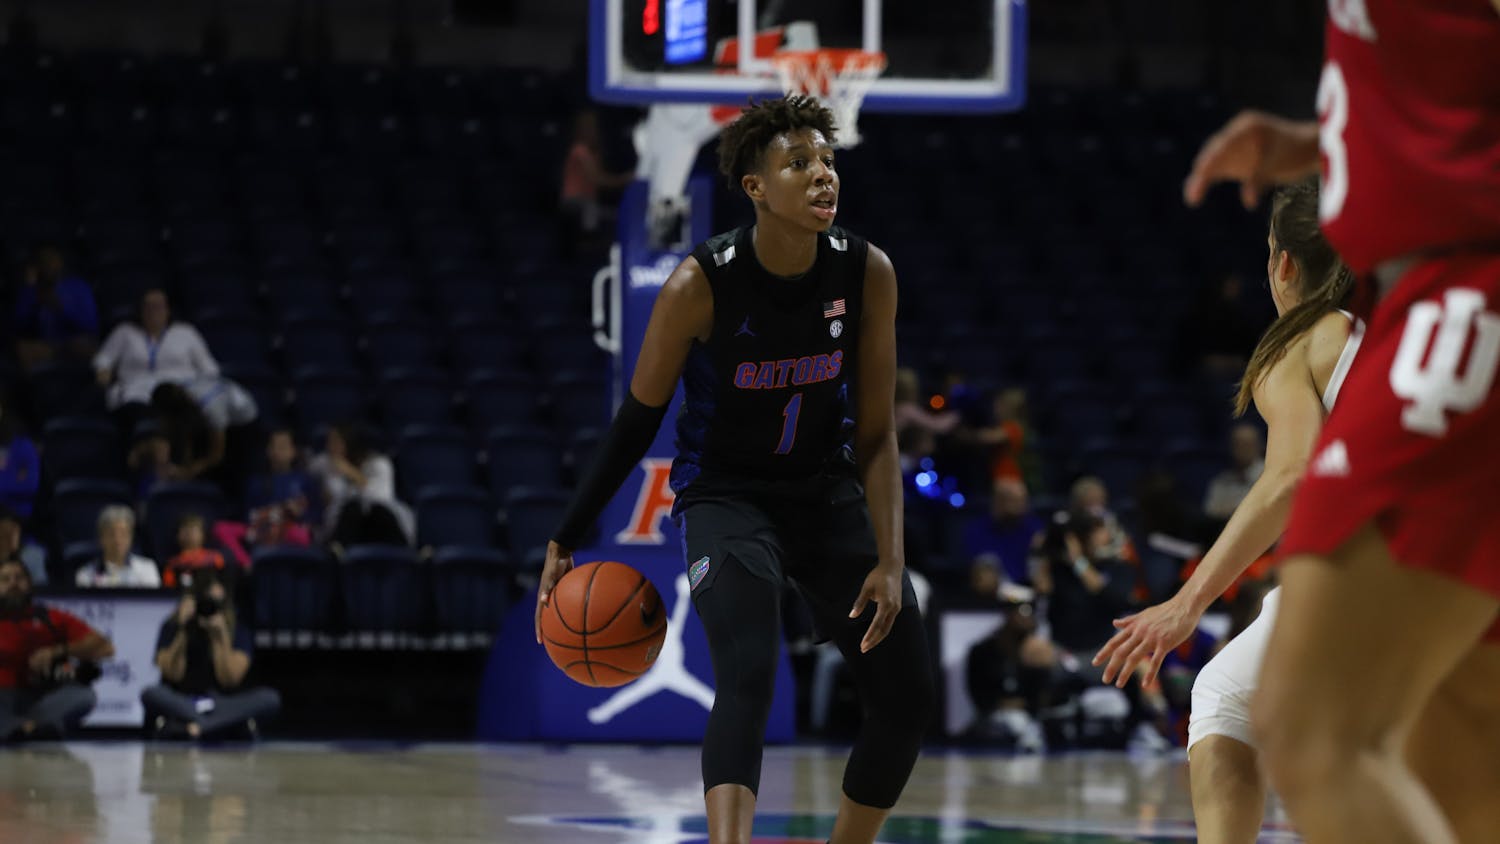 Guard Kiara Smith pulled up to tie the game during the first quarter. Photo is from the Florida-Indiana game in November 2019.